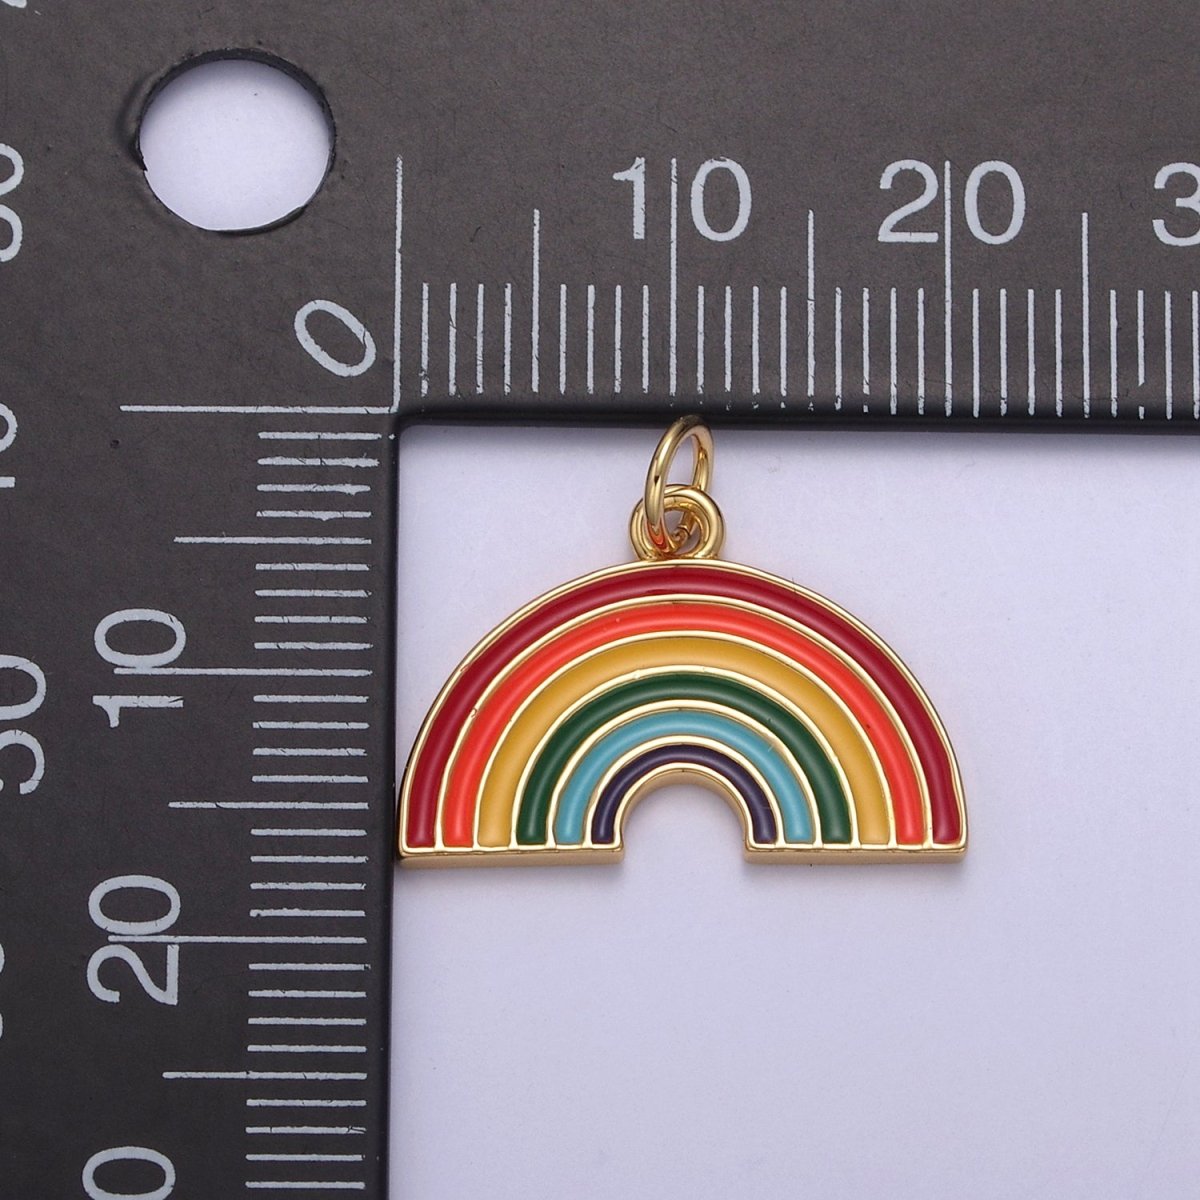 OS Mini Gold Filled Enamel Rainbow Charm Add on Charm for Bracelet Necklace Earring Supply N-744 - DLUXCA